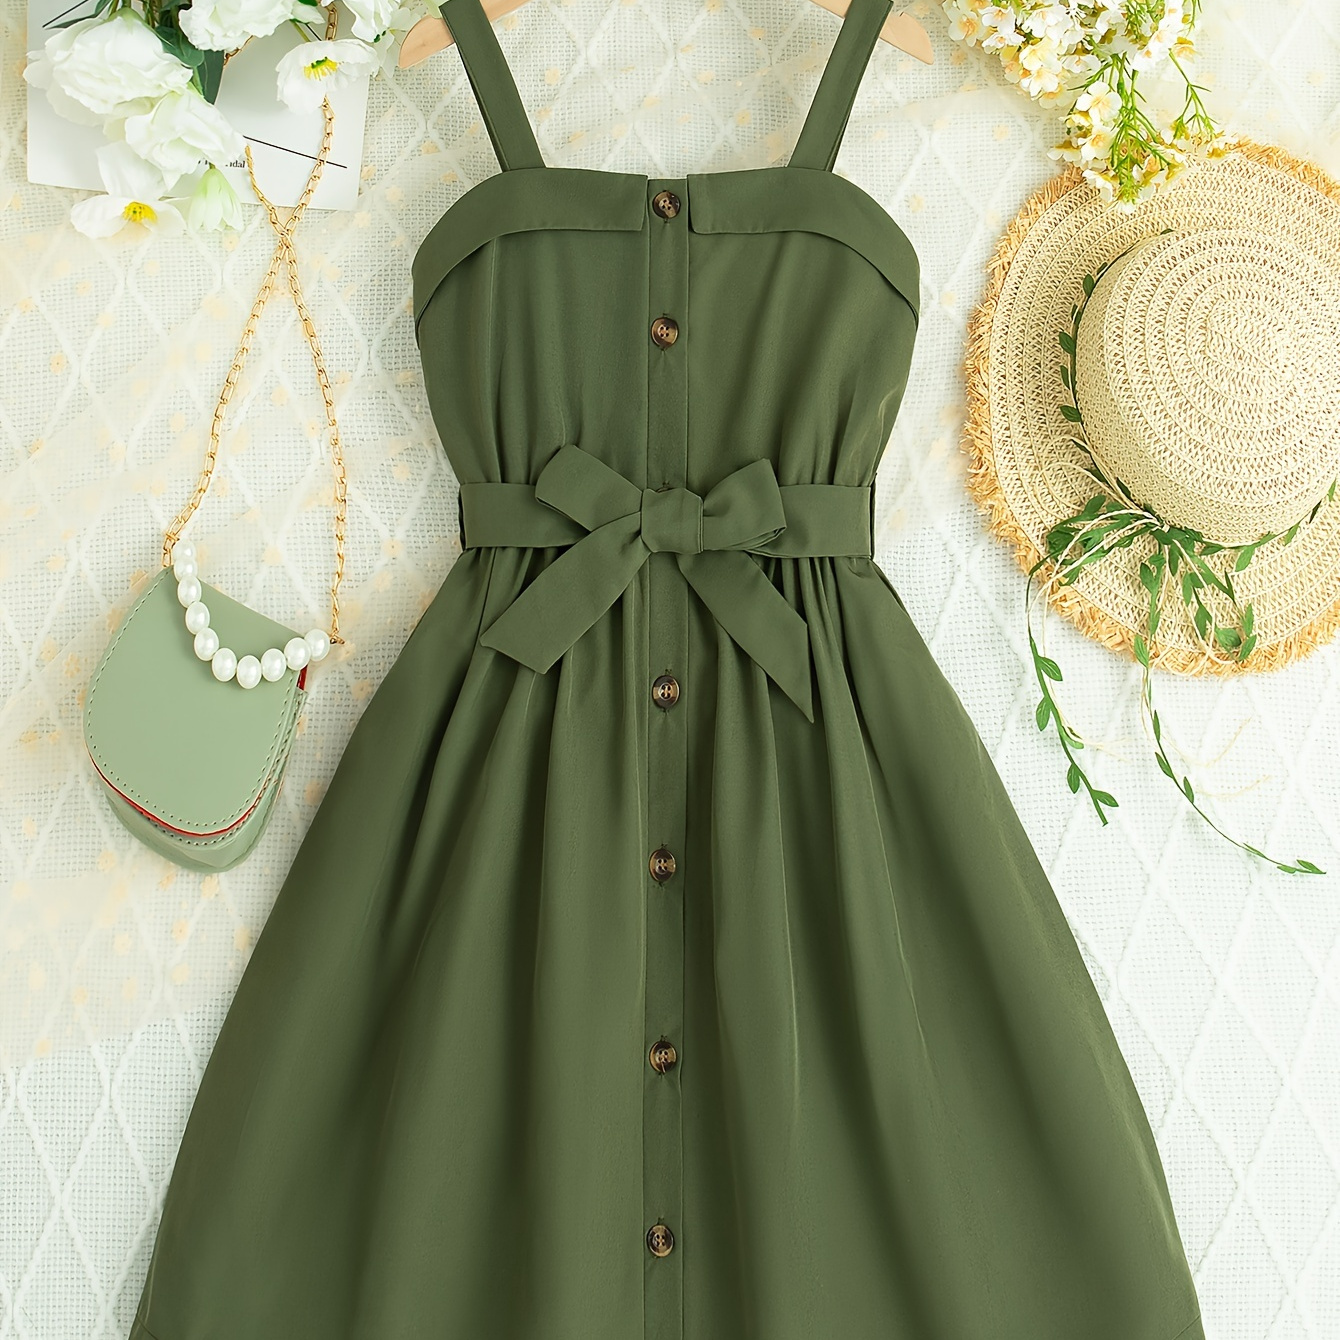 

Girls Summer Fashion Dress, Sleeveless Regular Fit With Belt, Casual Outing, Youthful Style, Solid Color, Thick Straps With Front Button Closure, Green